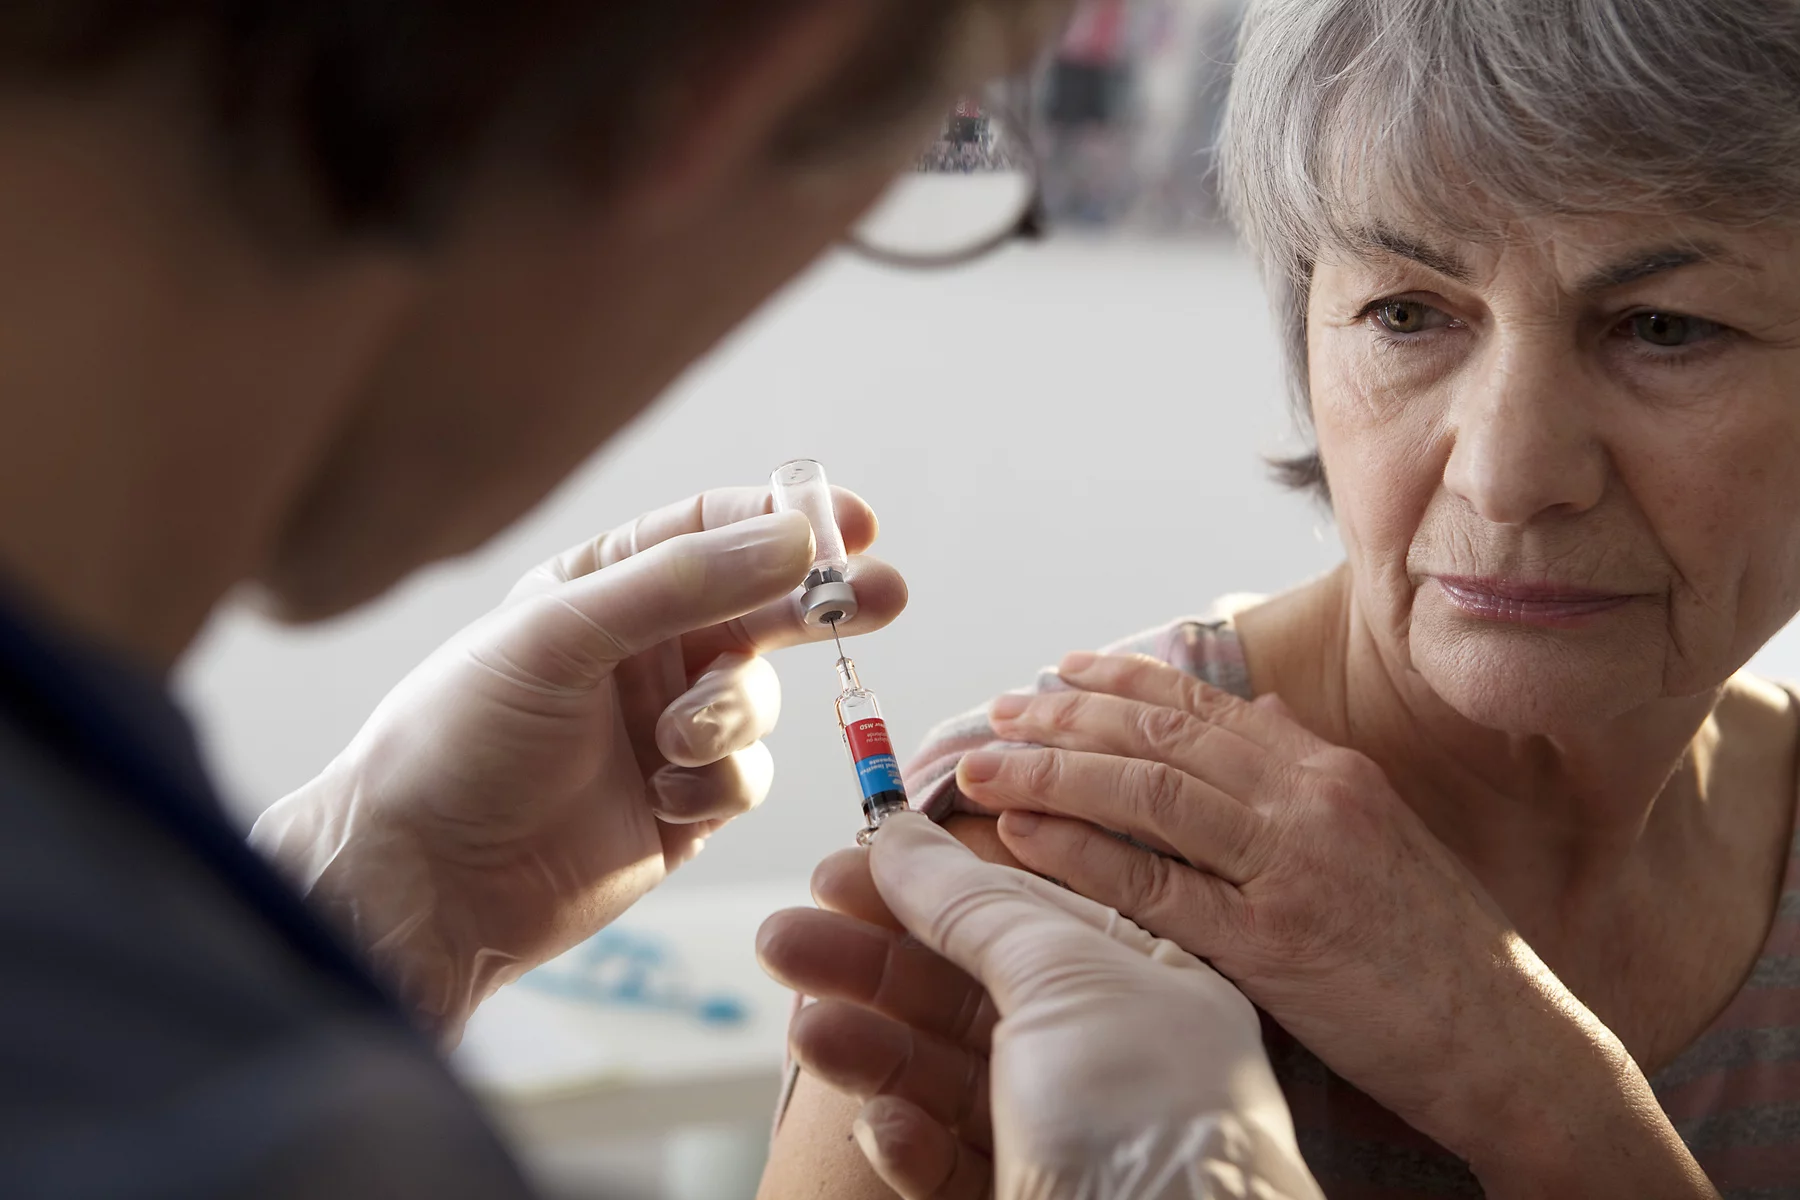 Elderly residents are eligible for free flu vaccinations in the Netherlands